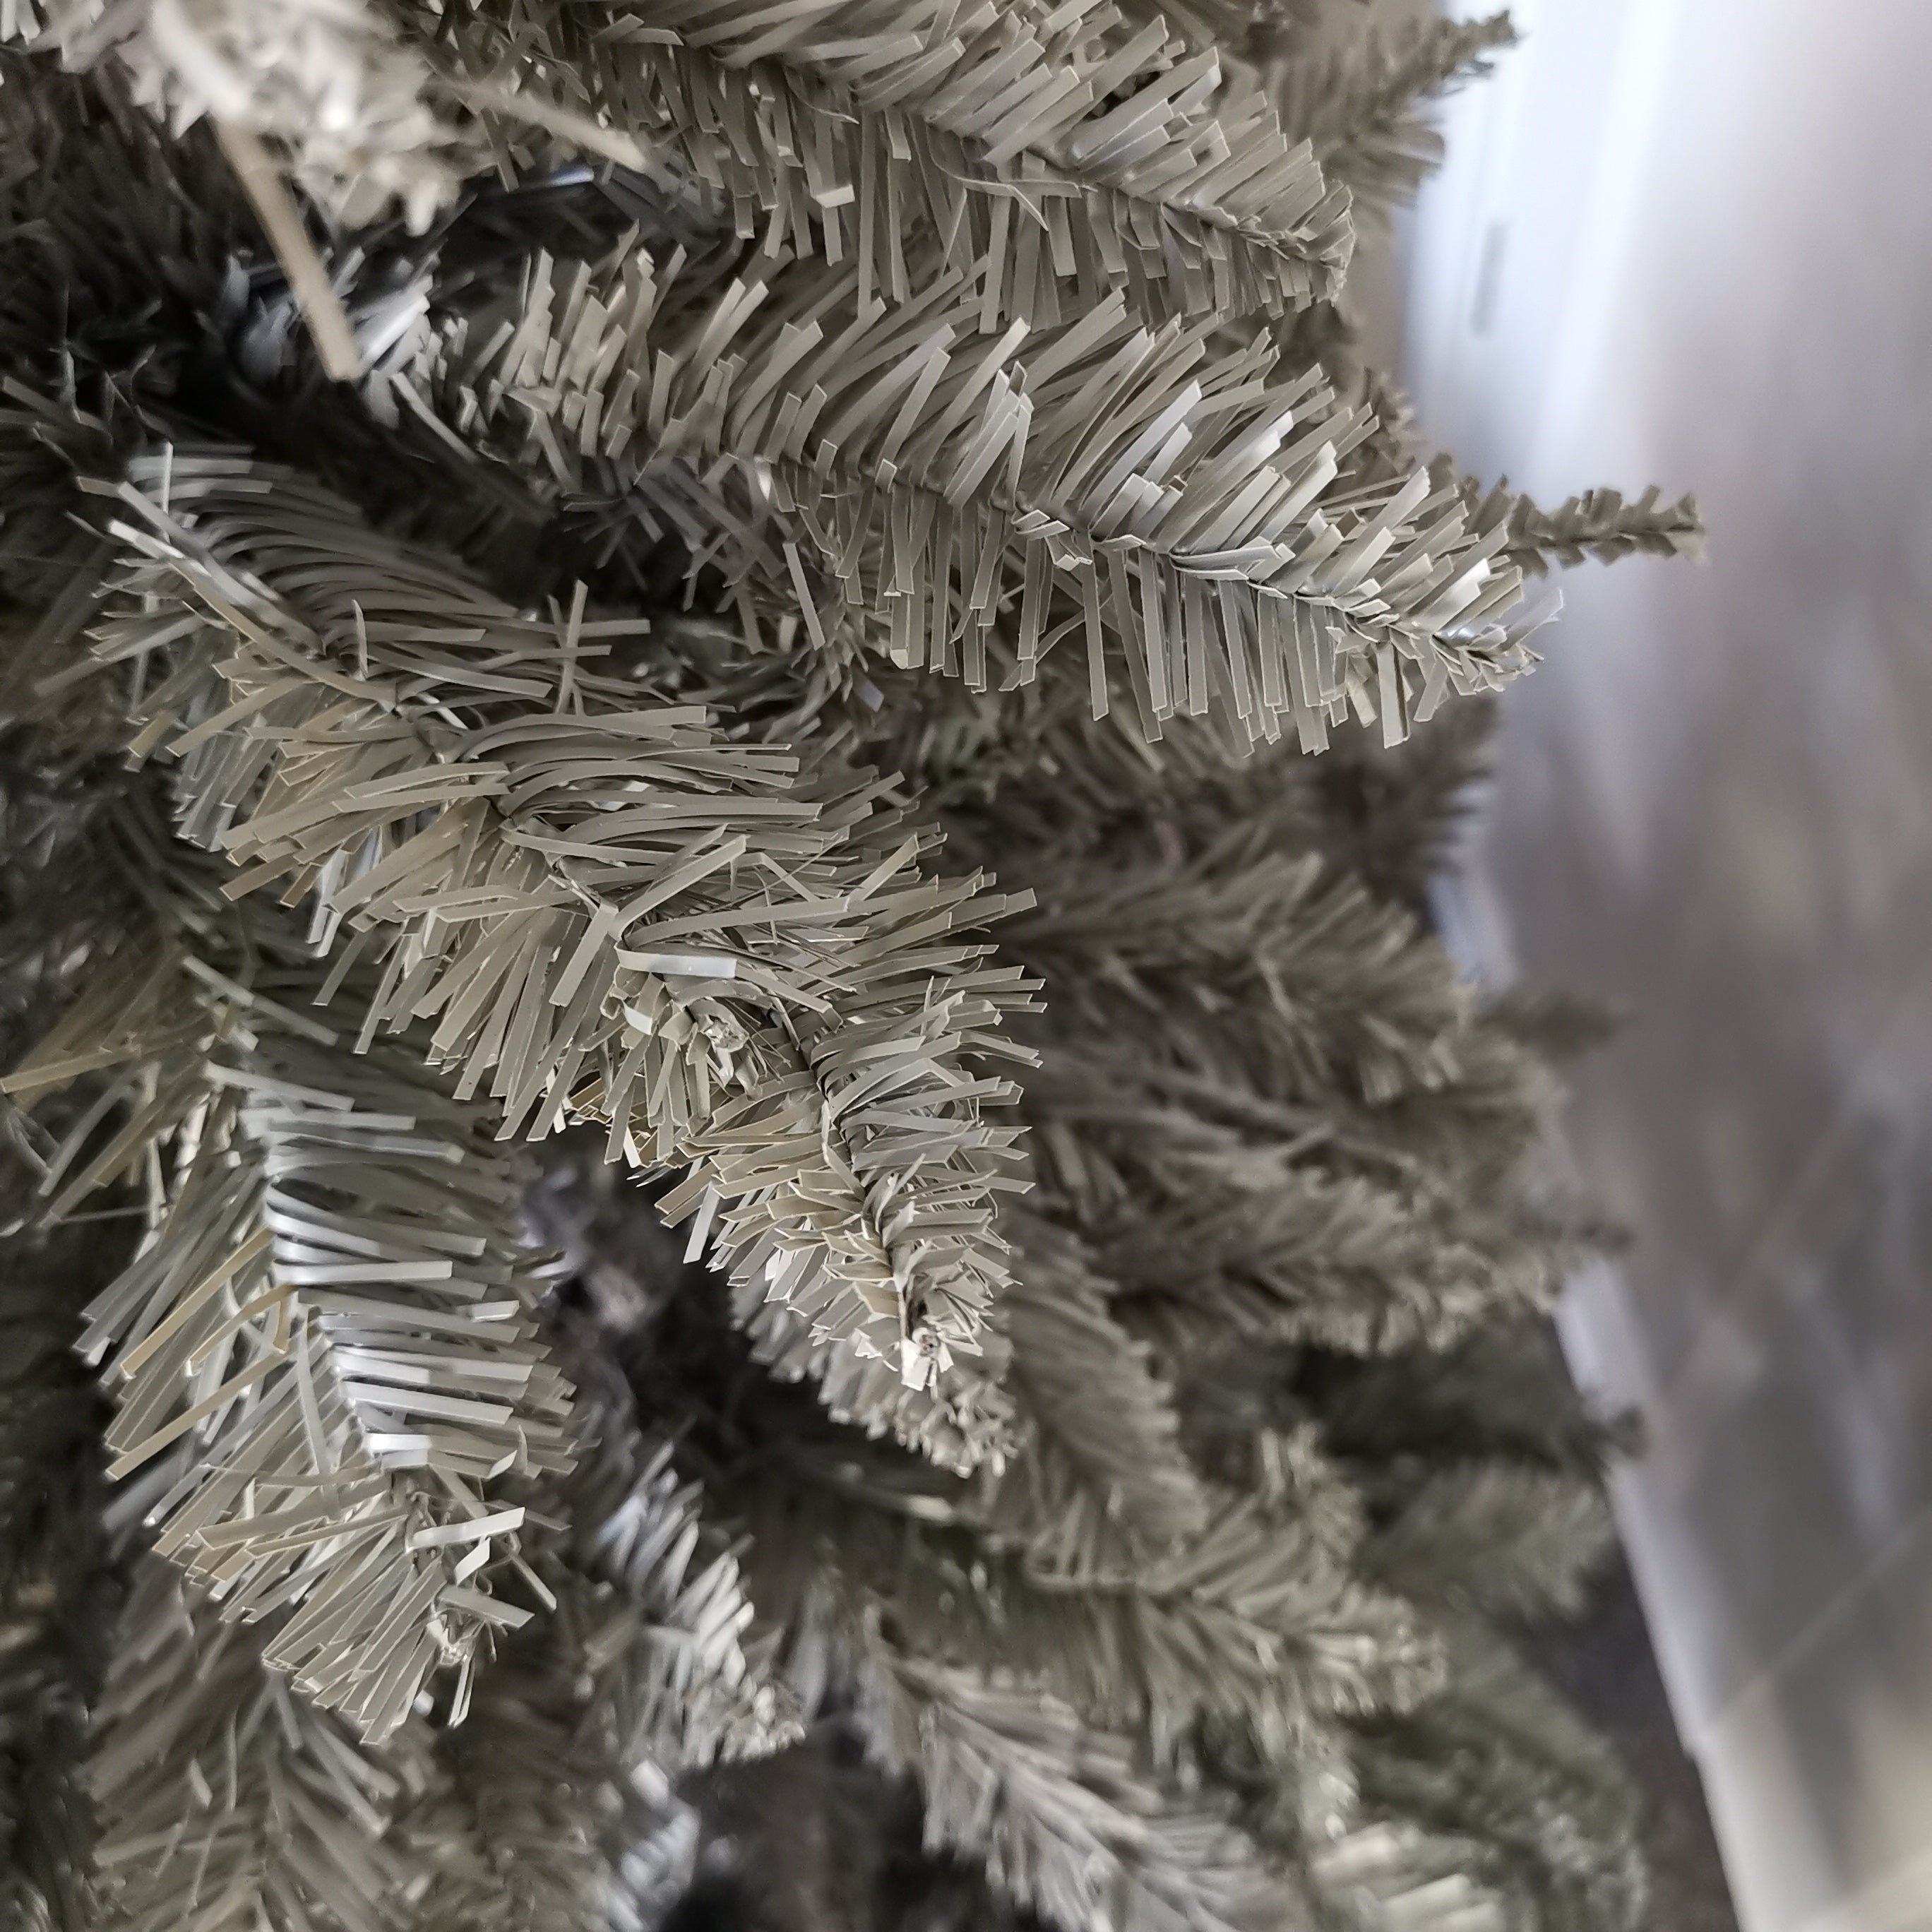 7ft (210cm) Luxury Charcoal Pine Grey Silver Christmas Tree with 1,315 Tips